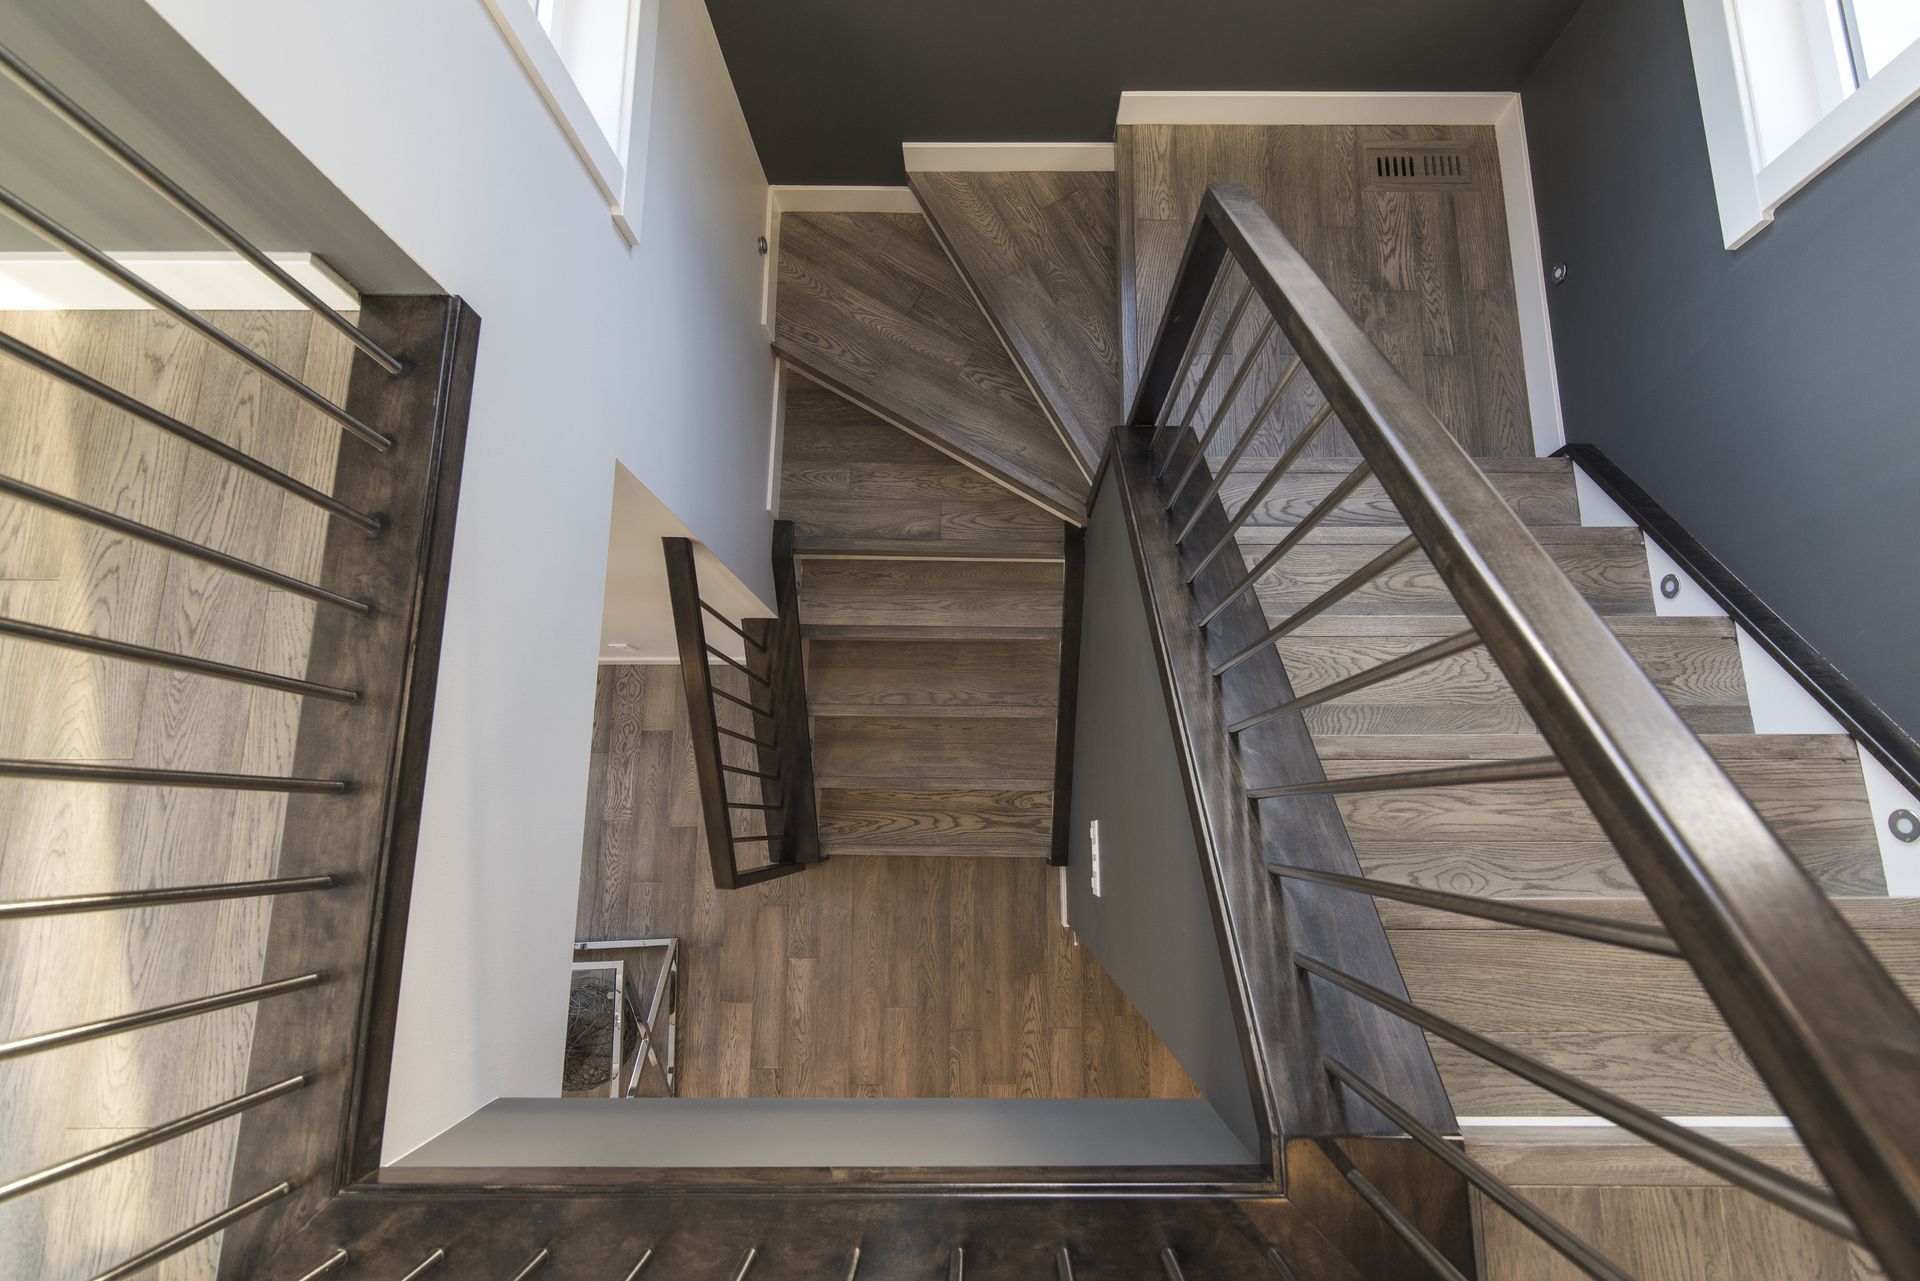 the stairs are made of wood and metal and have a metal railing .